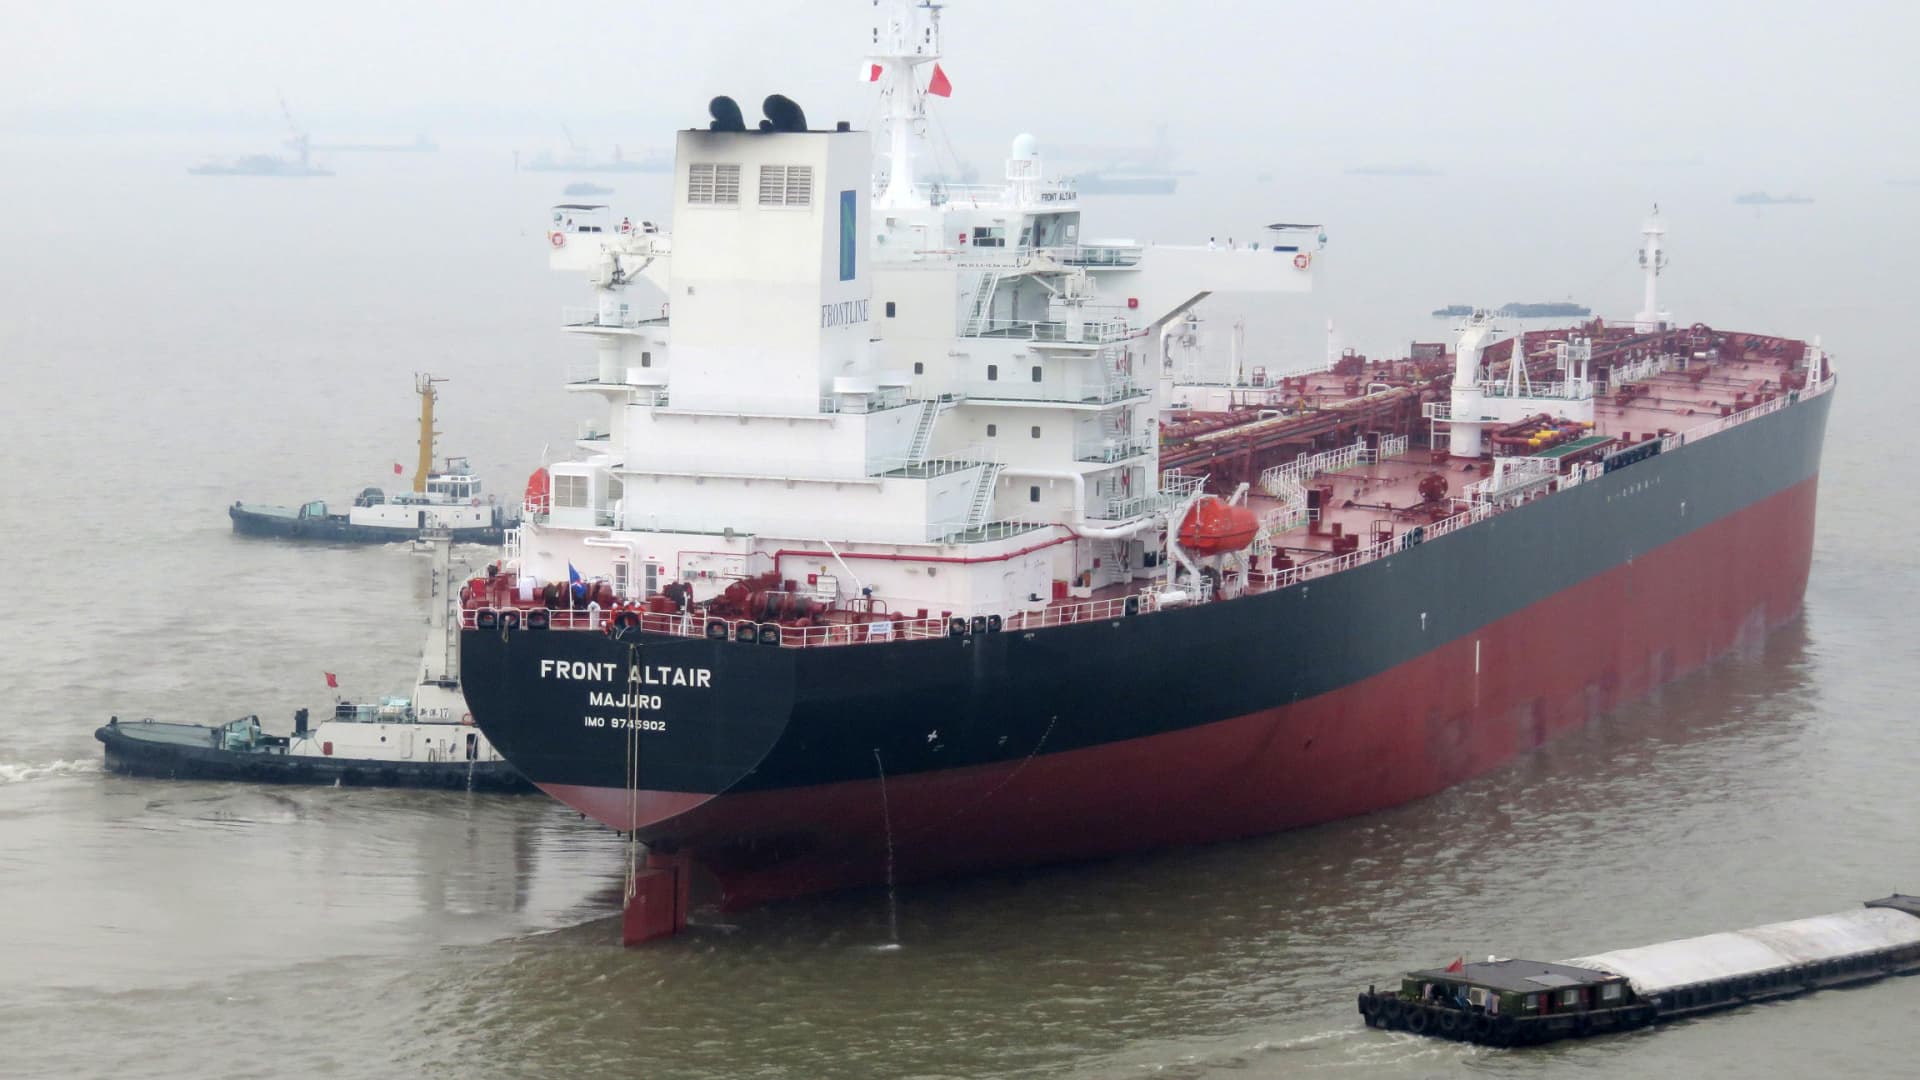 'They want to hit where it hurts': Here's why Iran could want to attack foreign tankers